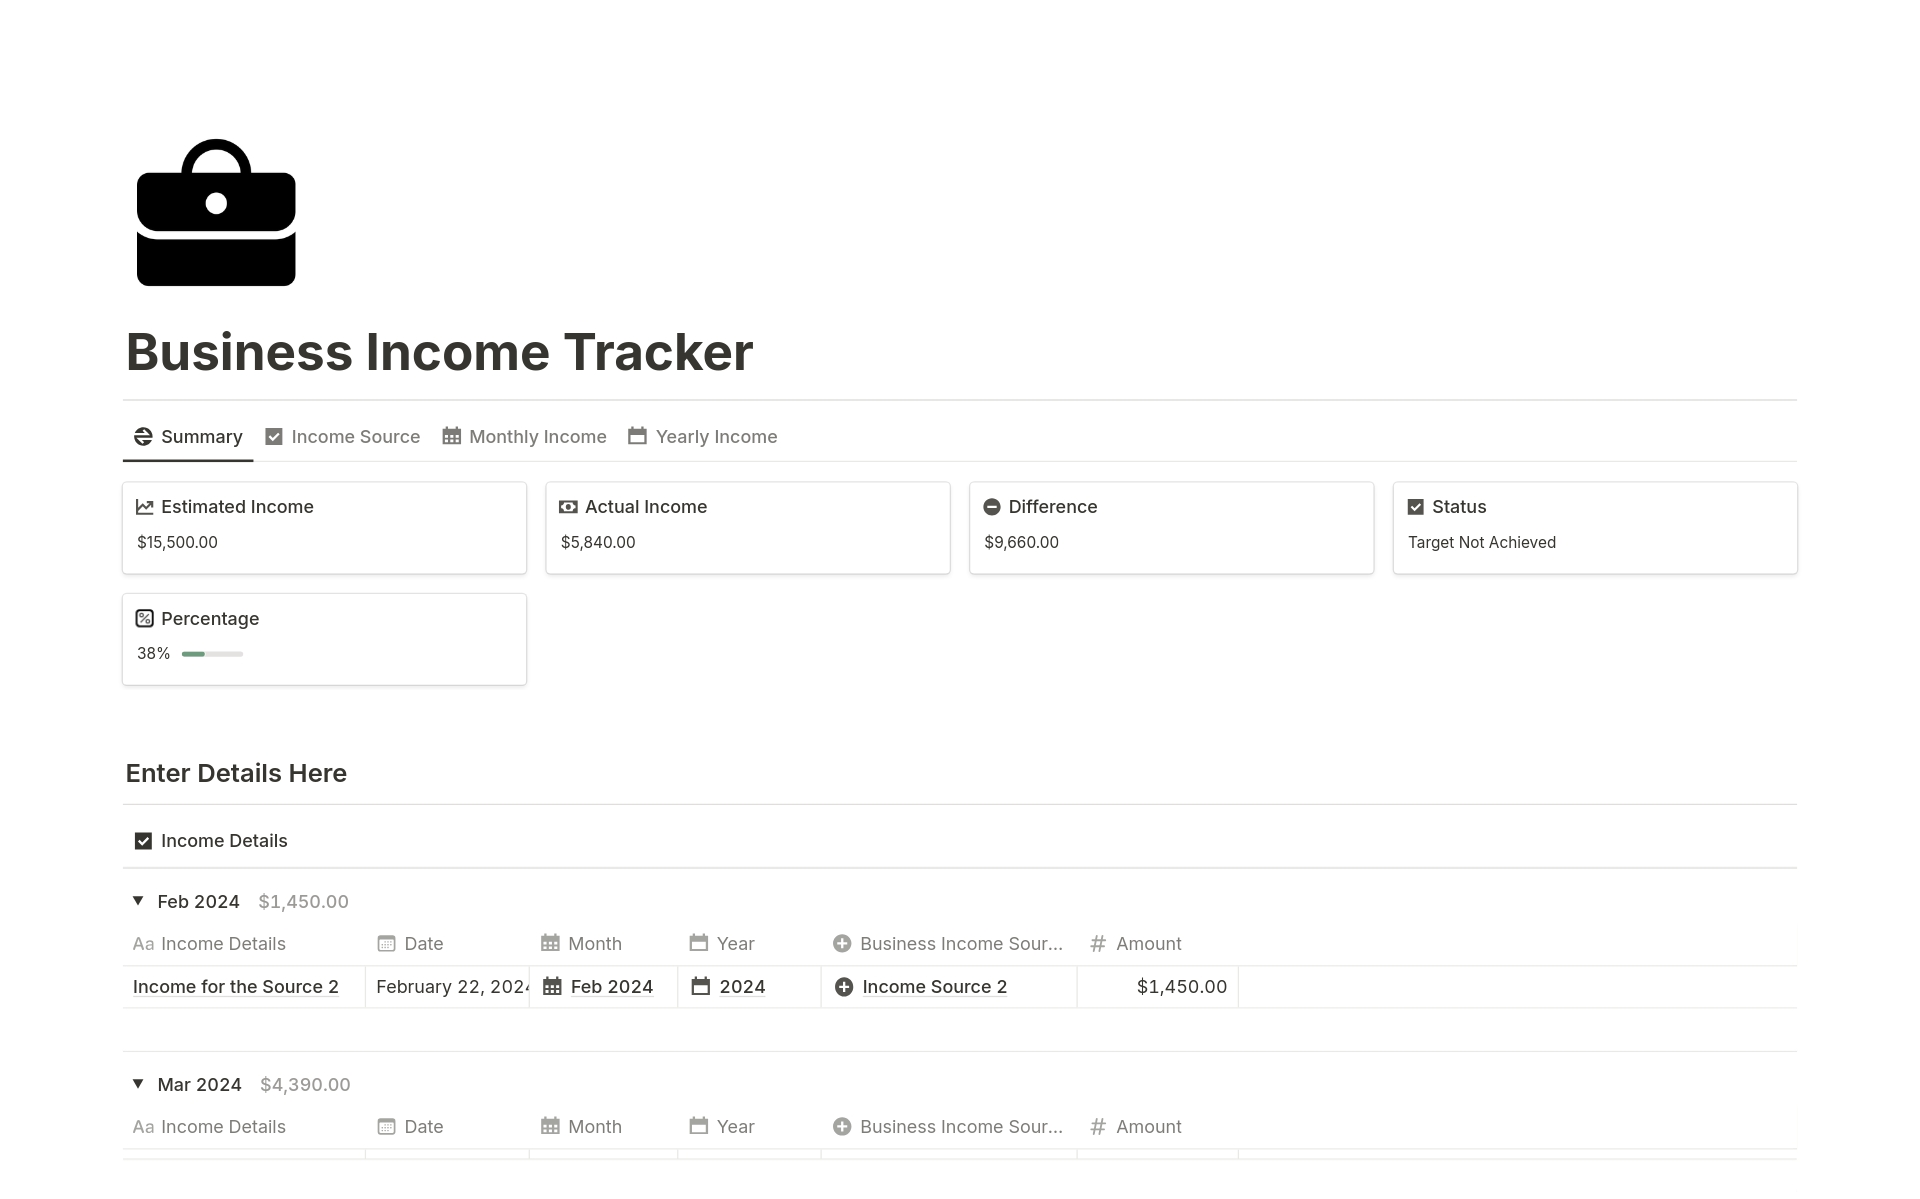 Ideal for those who manage a business, this tracker helps you keep tabs on business-related income such as sales, services, investments, and much more.